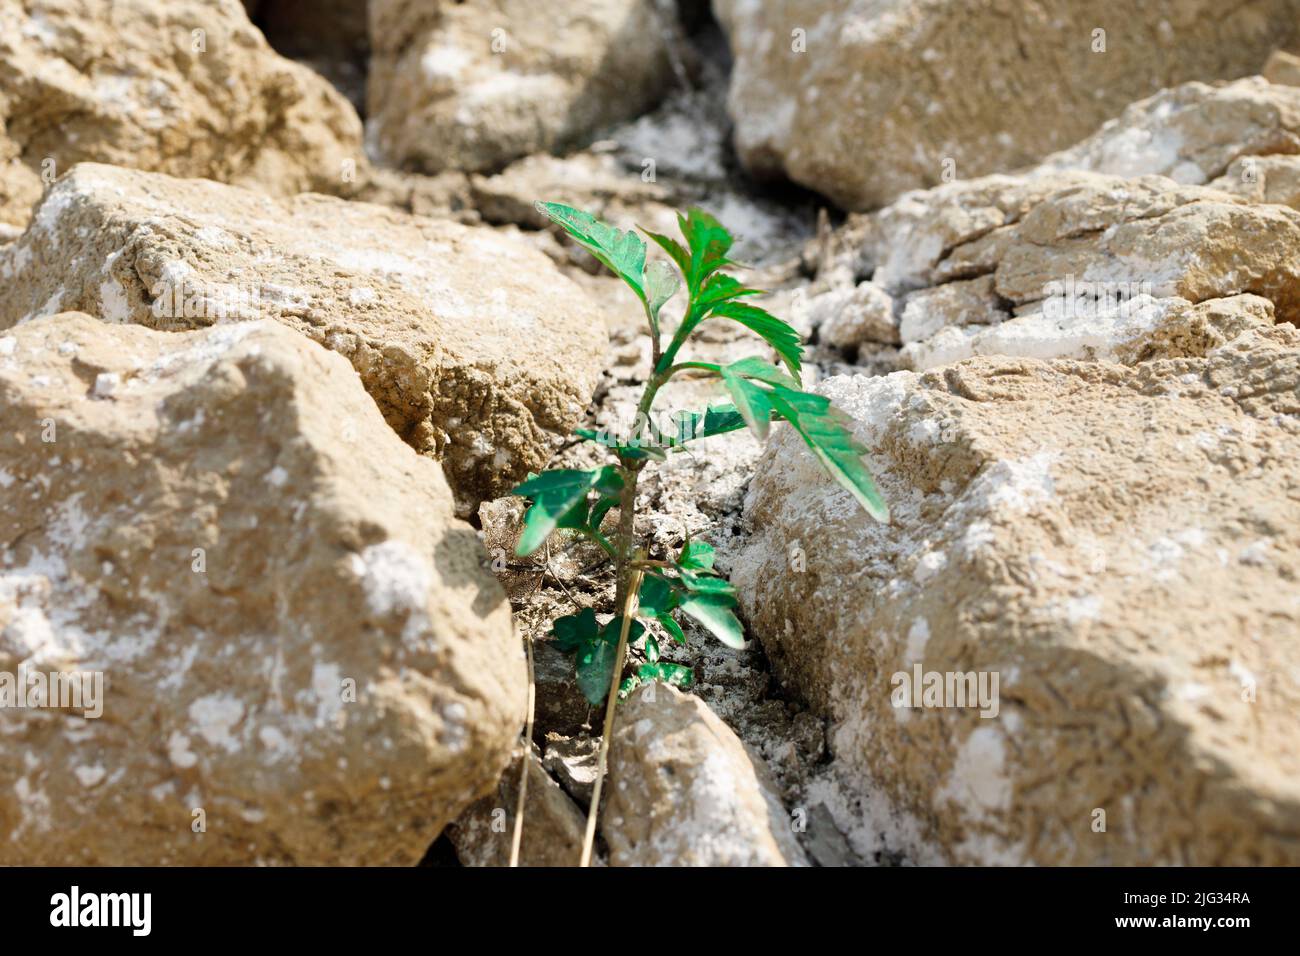 Detail of a plant fighting for survival in a dried out lake bed. Stock Photo